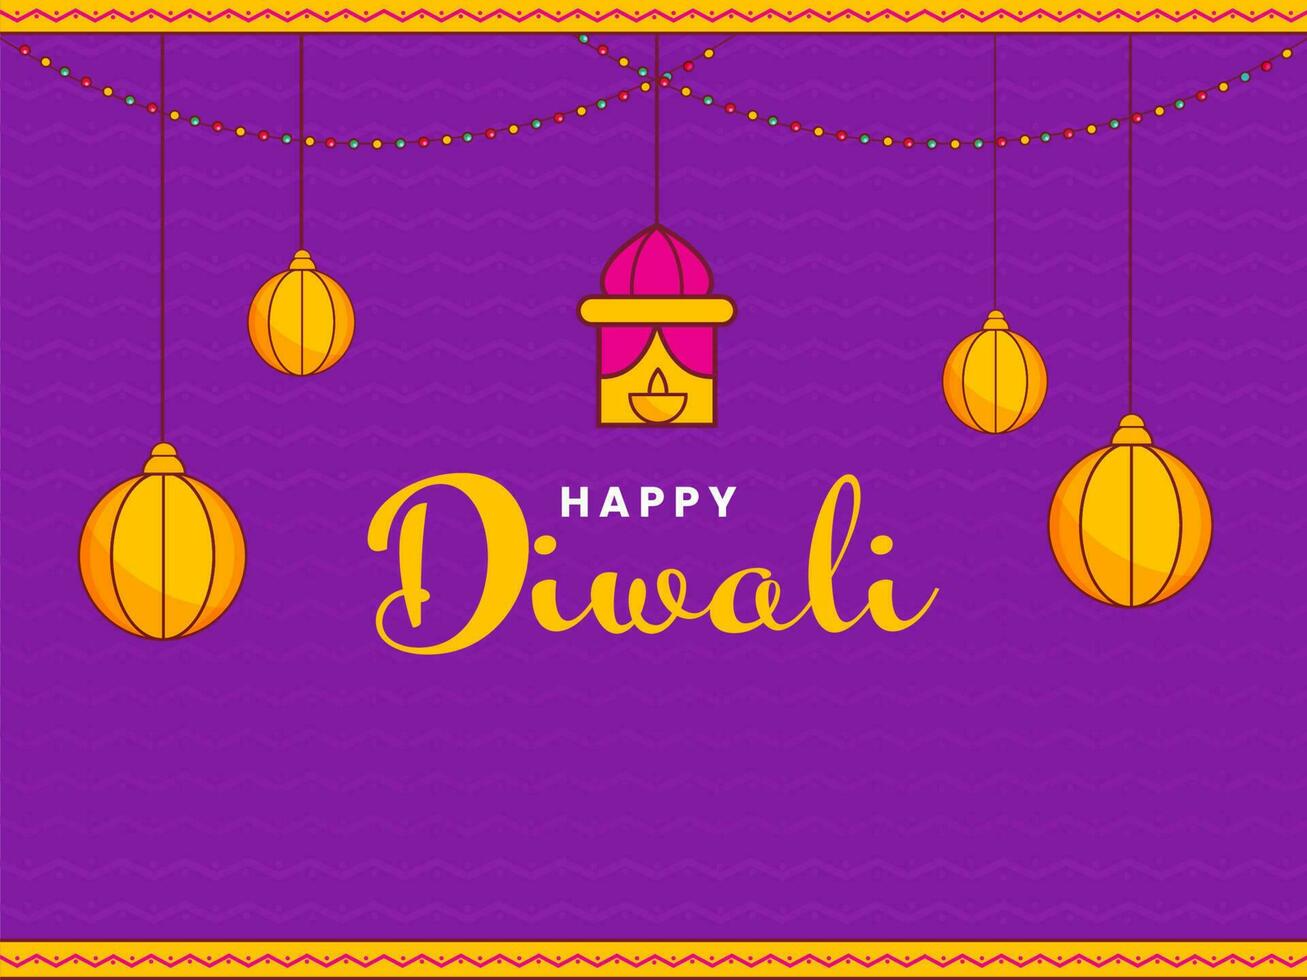 Happy Diwali Font With Lantern, Baubles Hang On Purple Zigzag Lines Background. vector